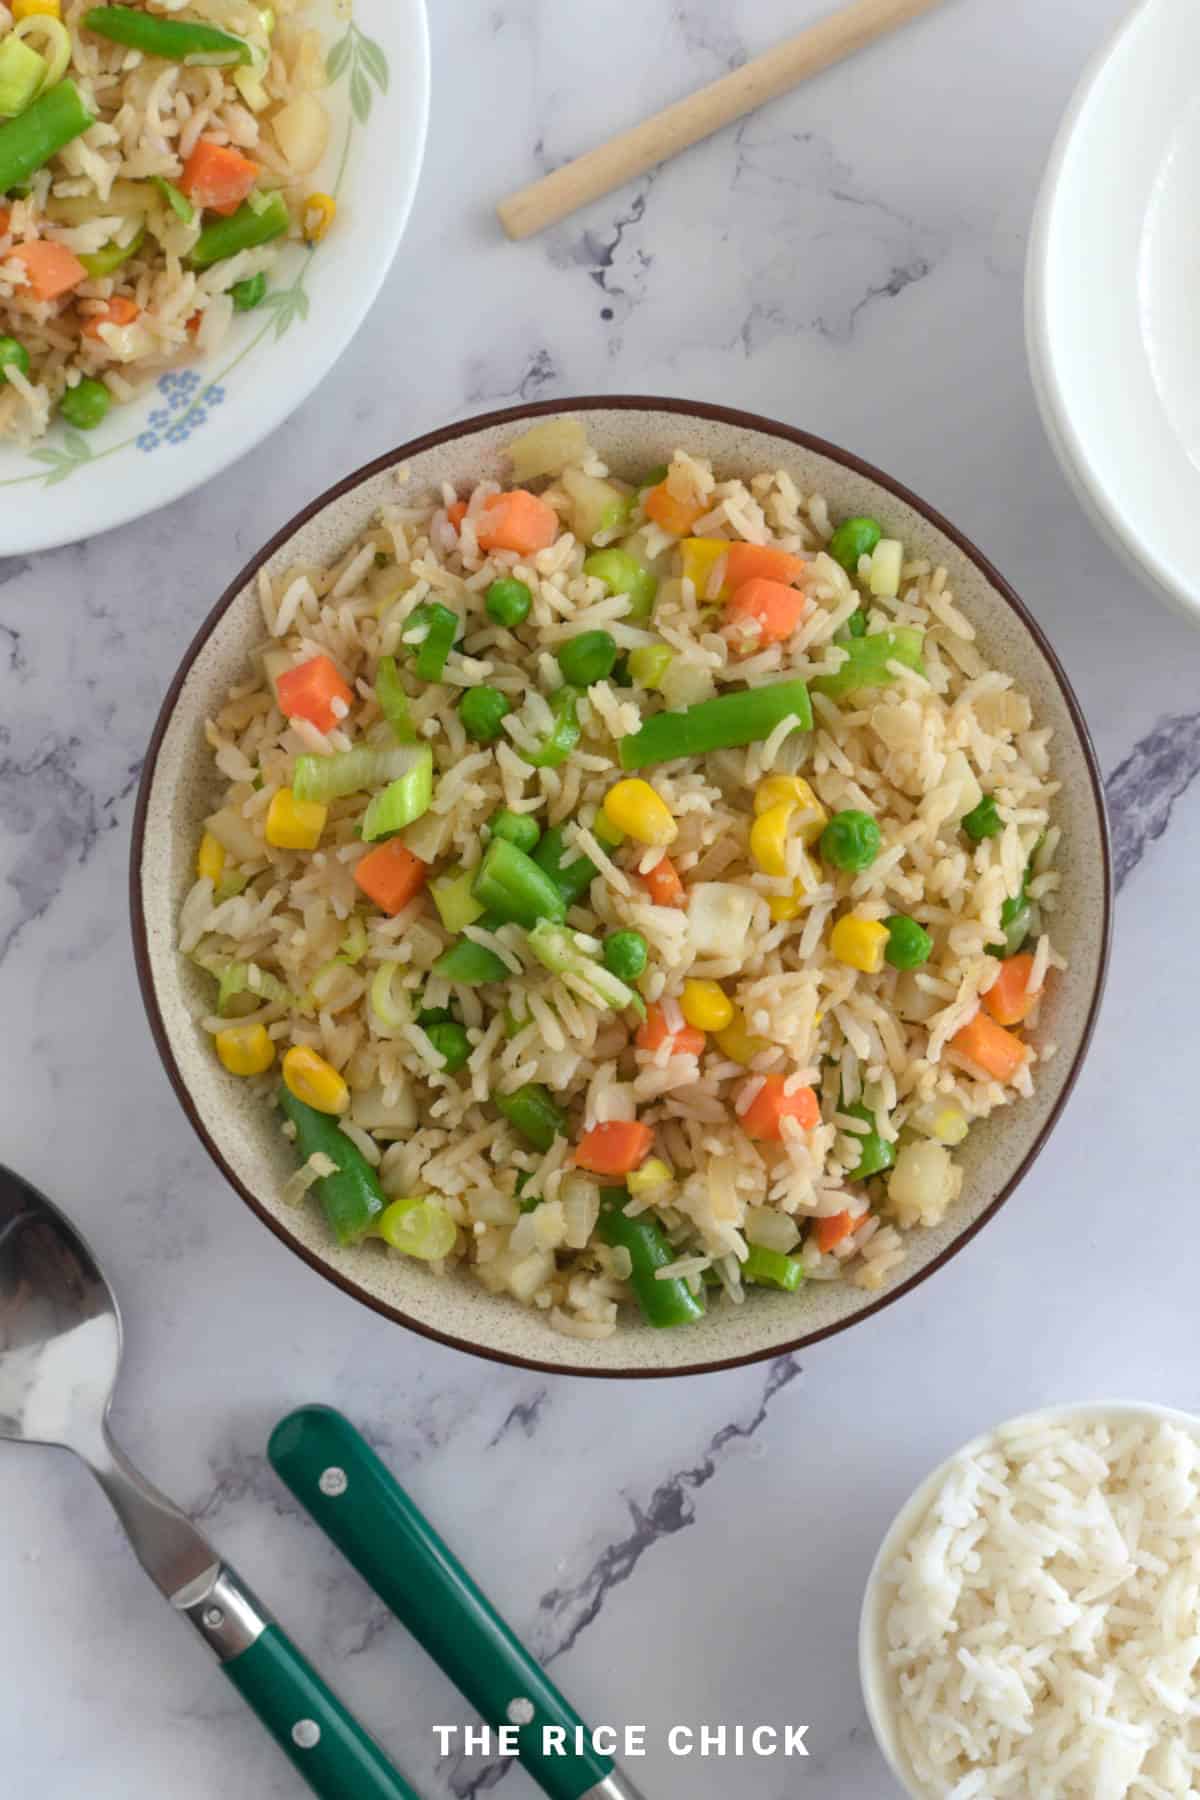 Fried rice with vegetables in a bowl.